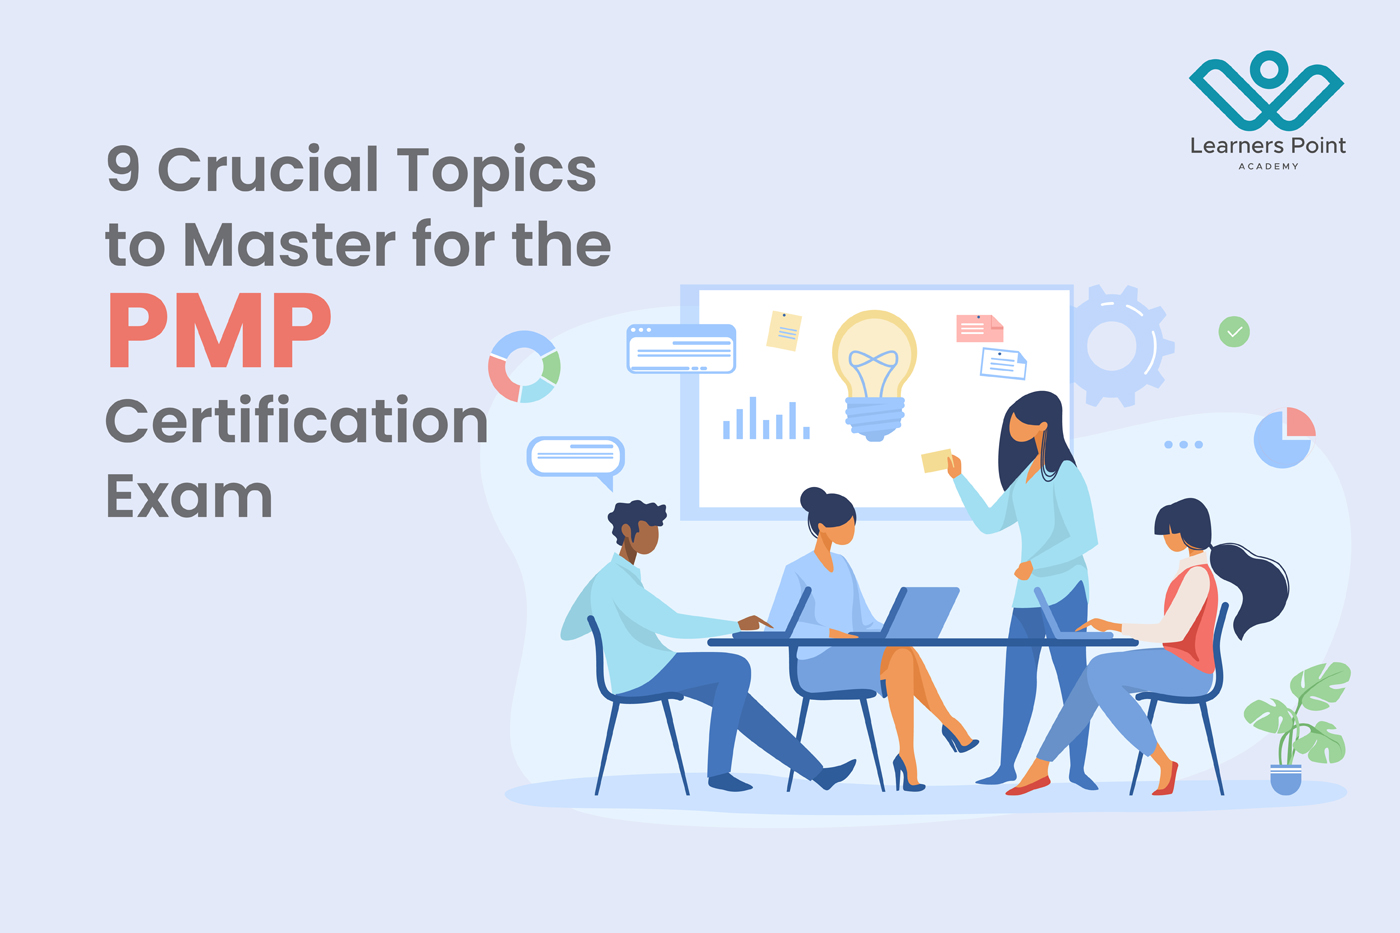 9 Crucial Topics to Master for the PMP Certification Exam